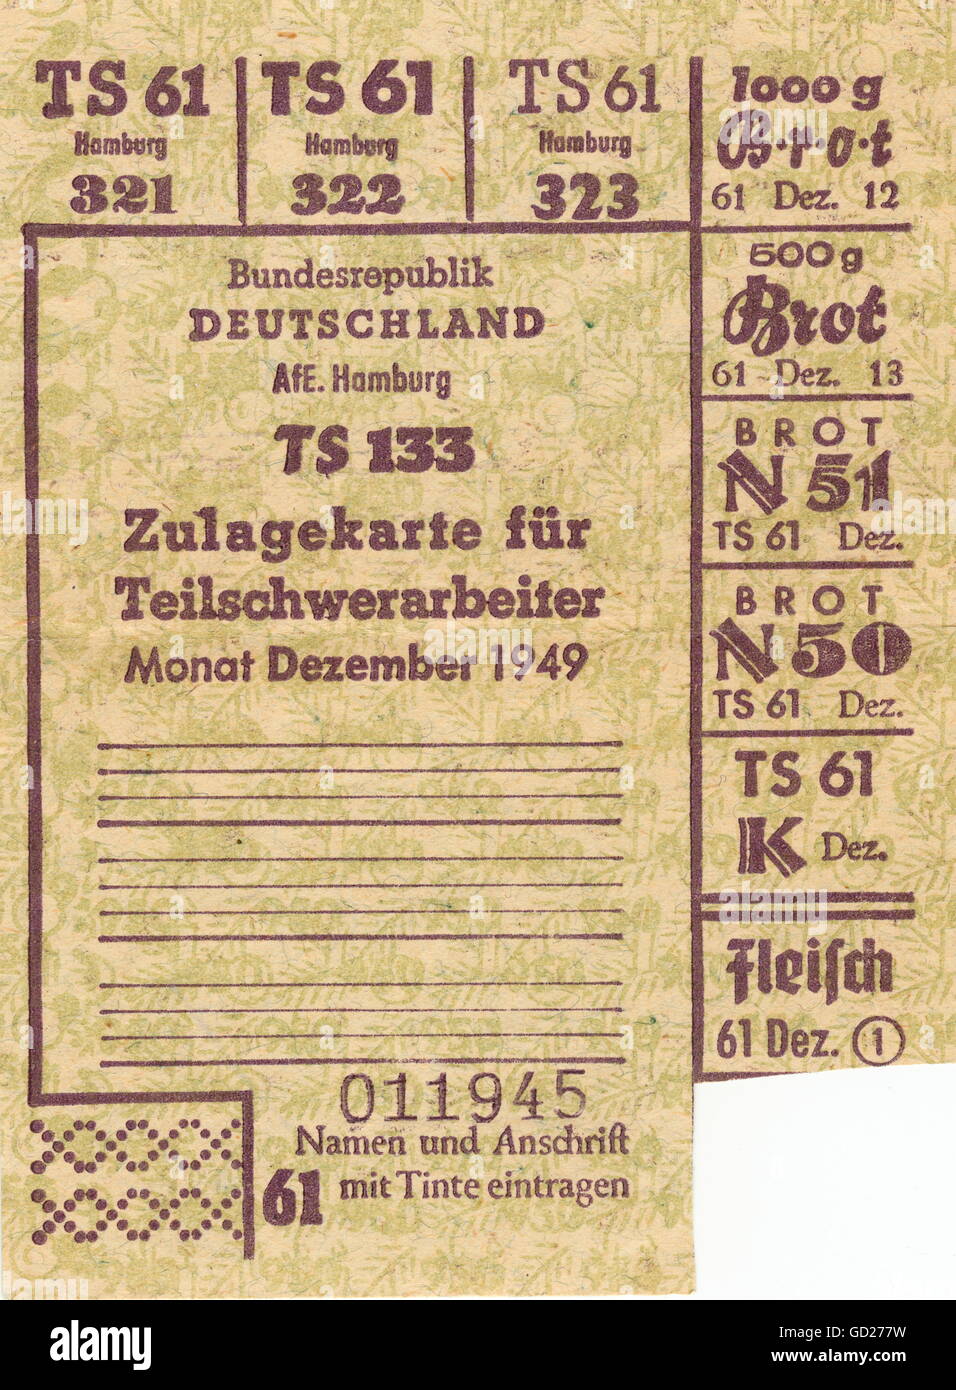 trade, food ration card (allowance card) for part-time heavy labourer, Hamburg, West Germany, valid in December 1949 popstwar era, post war period, food ration cards, rationing, providing, poverty, plight, misery, economy, in the forties of the twentieth century historic, historical, clipping, cut out, cut-out, cut-outs, 20th century, 1940s, Additional-Rights-Clearences-Not Available Stock Photo